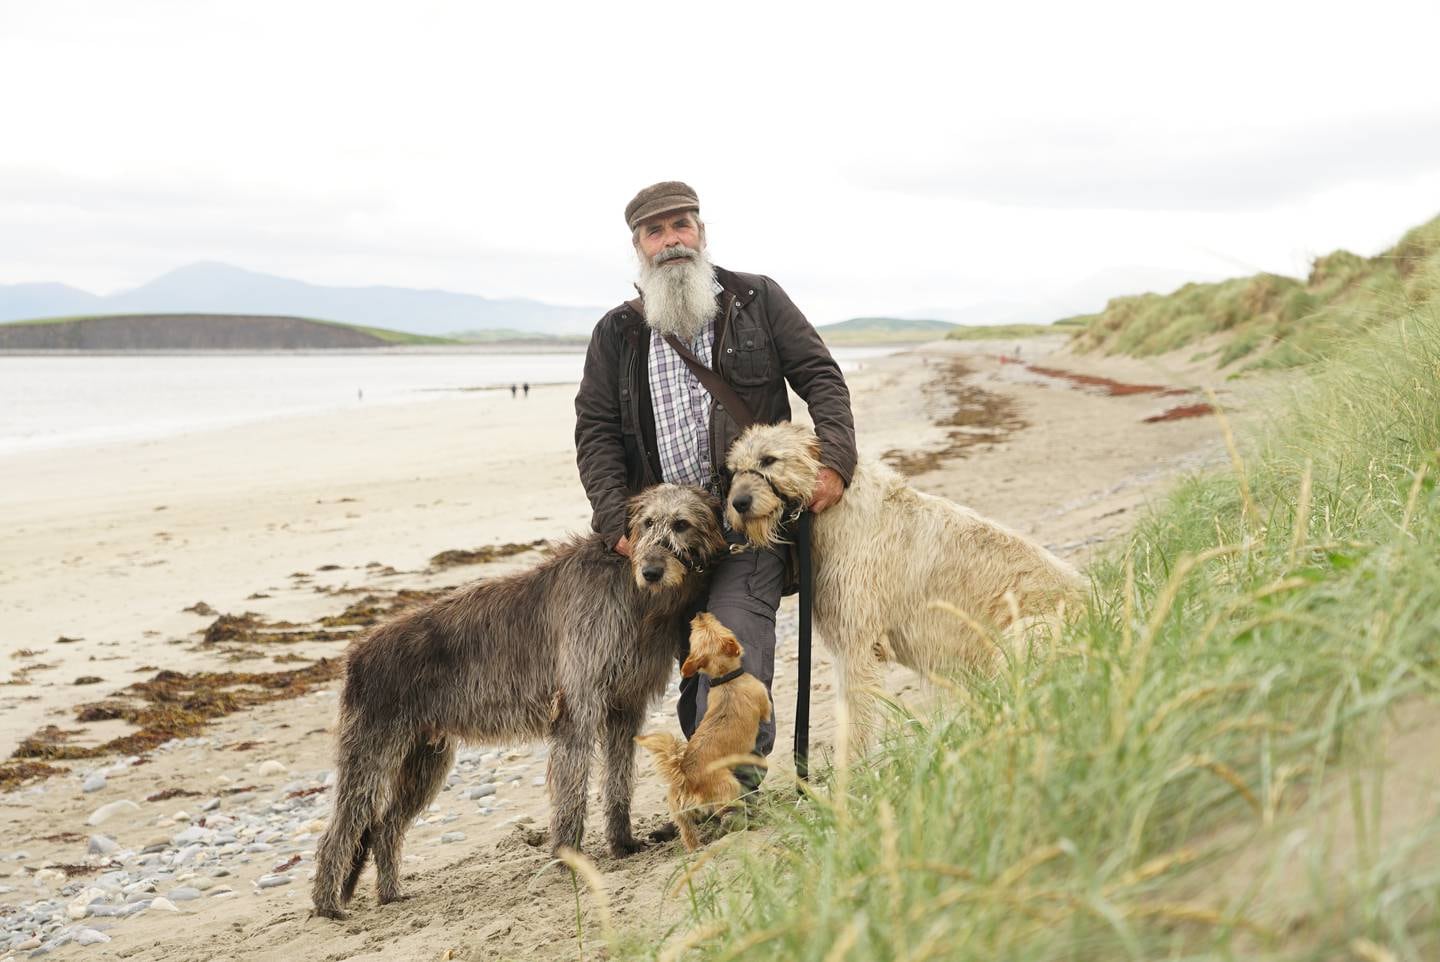 Pictures for an article by Keith Duggan on Aidan who walks the dogs as an AirBnB experience.